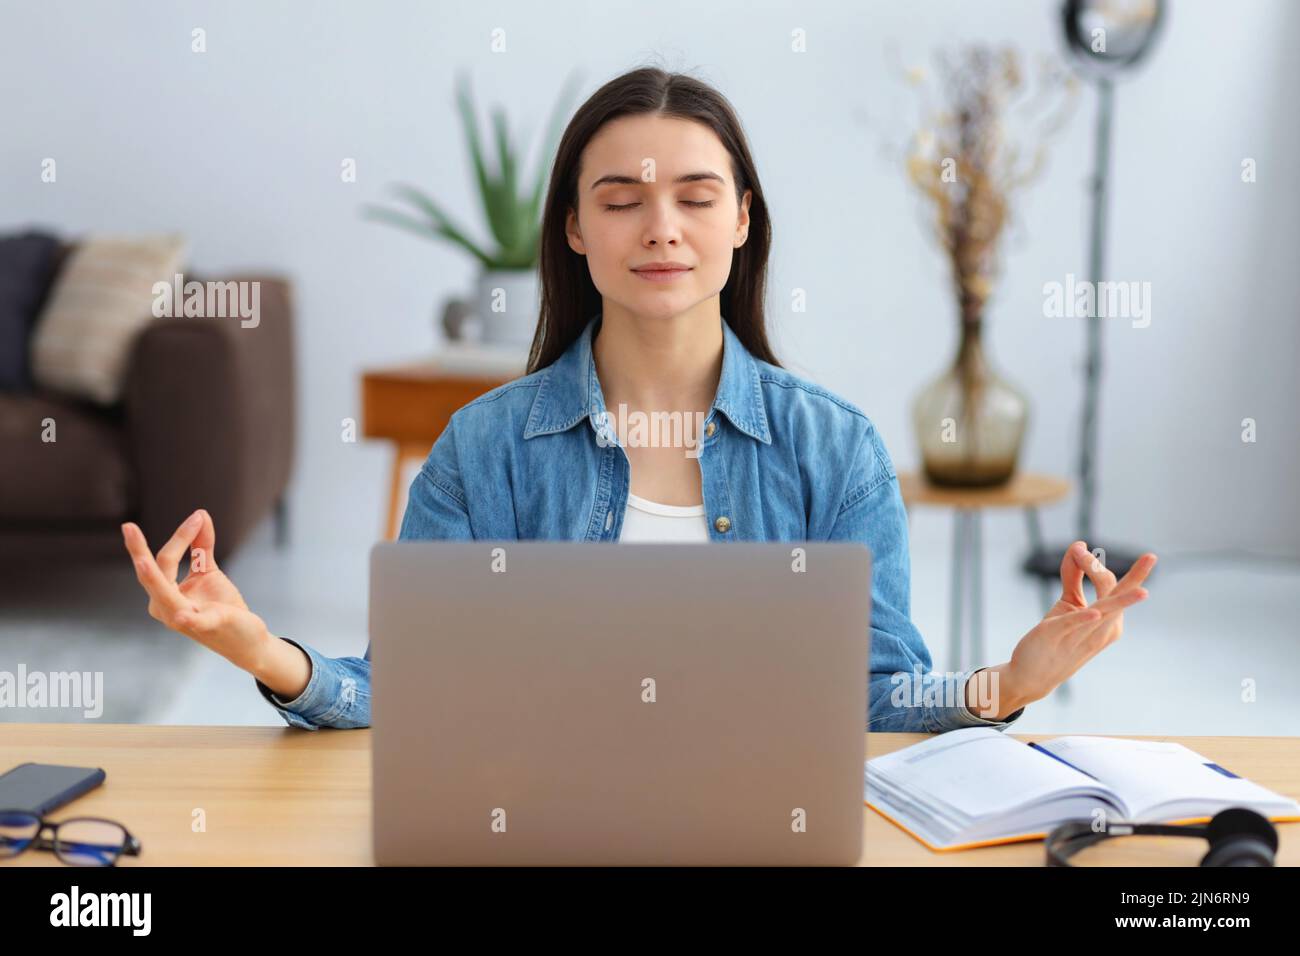 Young woman meditating eyes closed thinking of good things and focusing on positive feelings and emotions Stock Photo